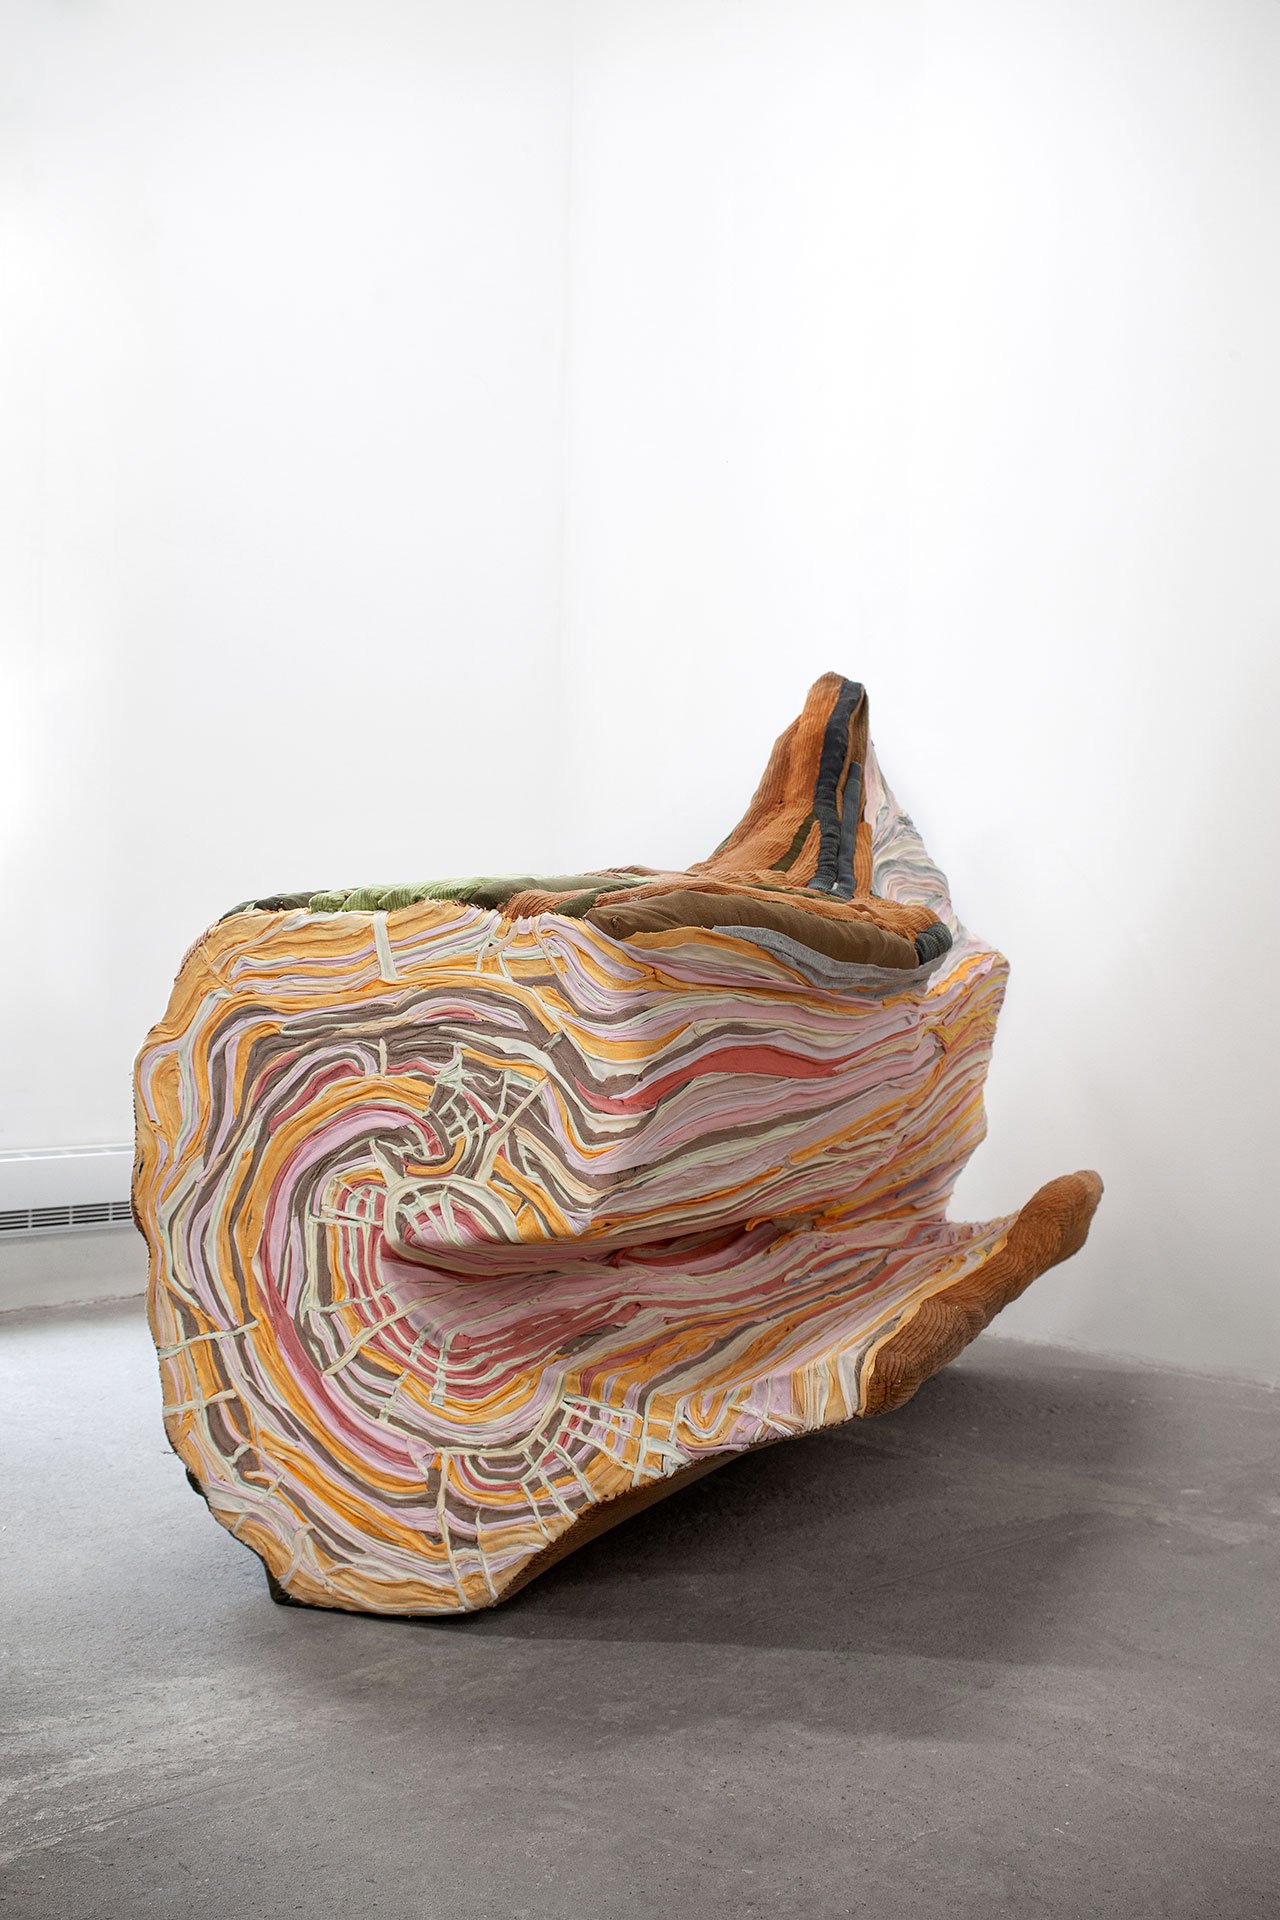 Tamara Kostianovsky, Uprooted, 2021. Discarded Textiles on Wood. 64 x 48 x 34 in. Courtesy of Slag Gallery and Artist